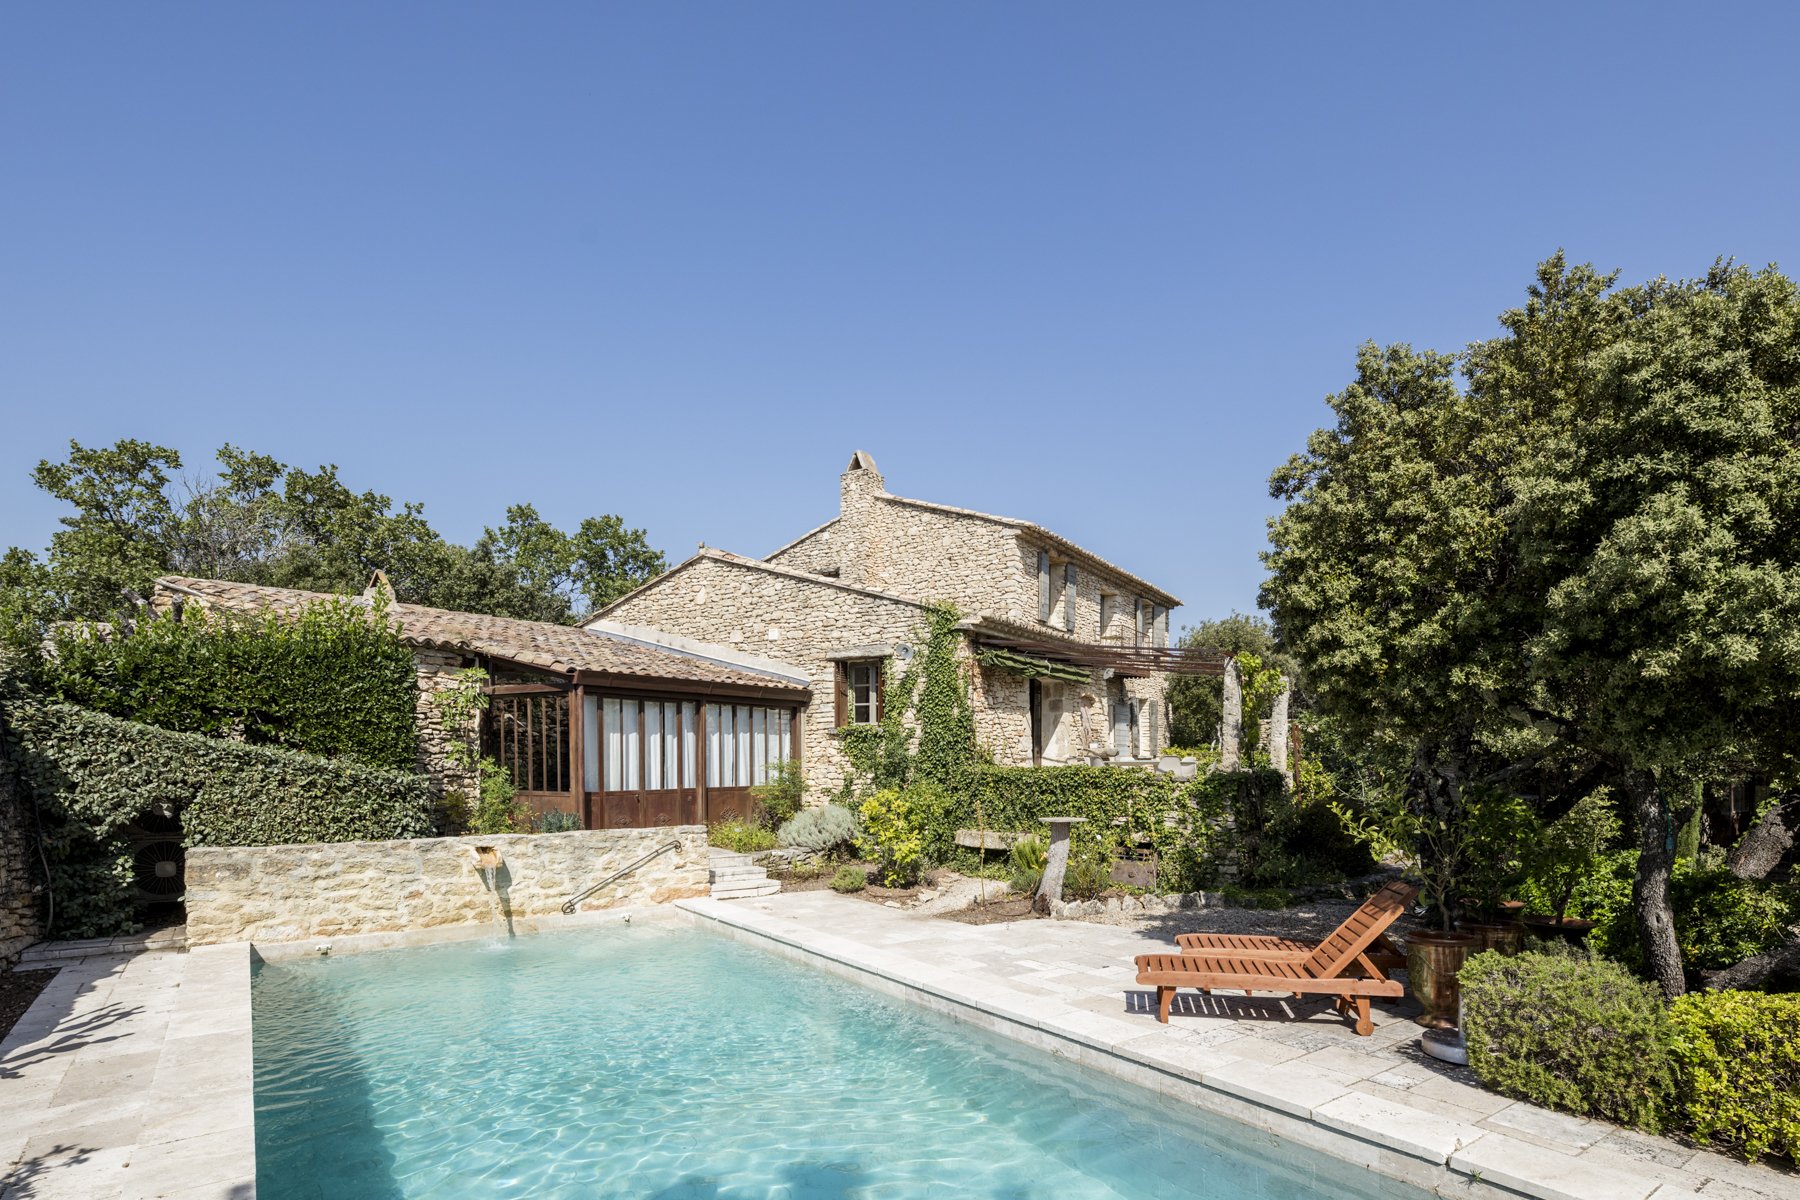 Francis York  Charming Stone House in the Provencal Village of Gordes, France  00010.jpg